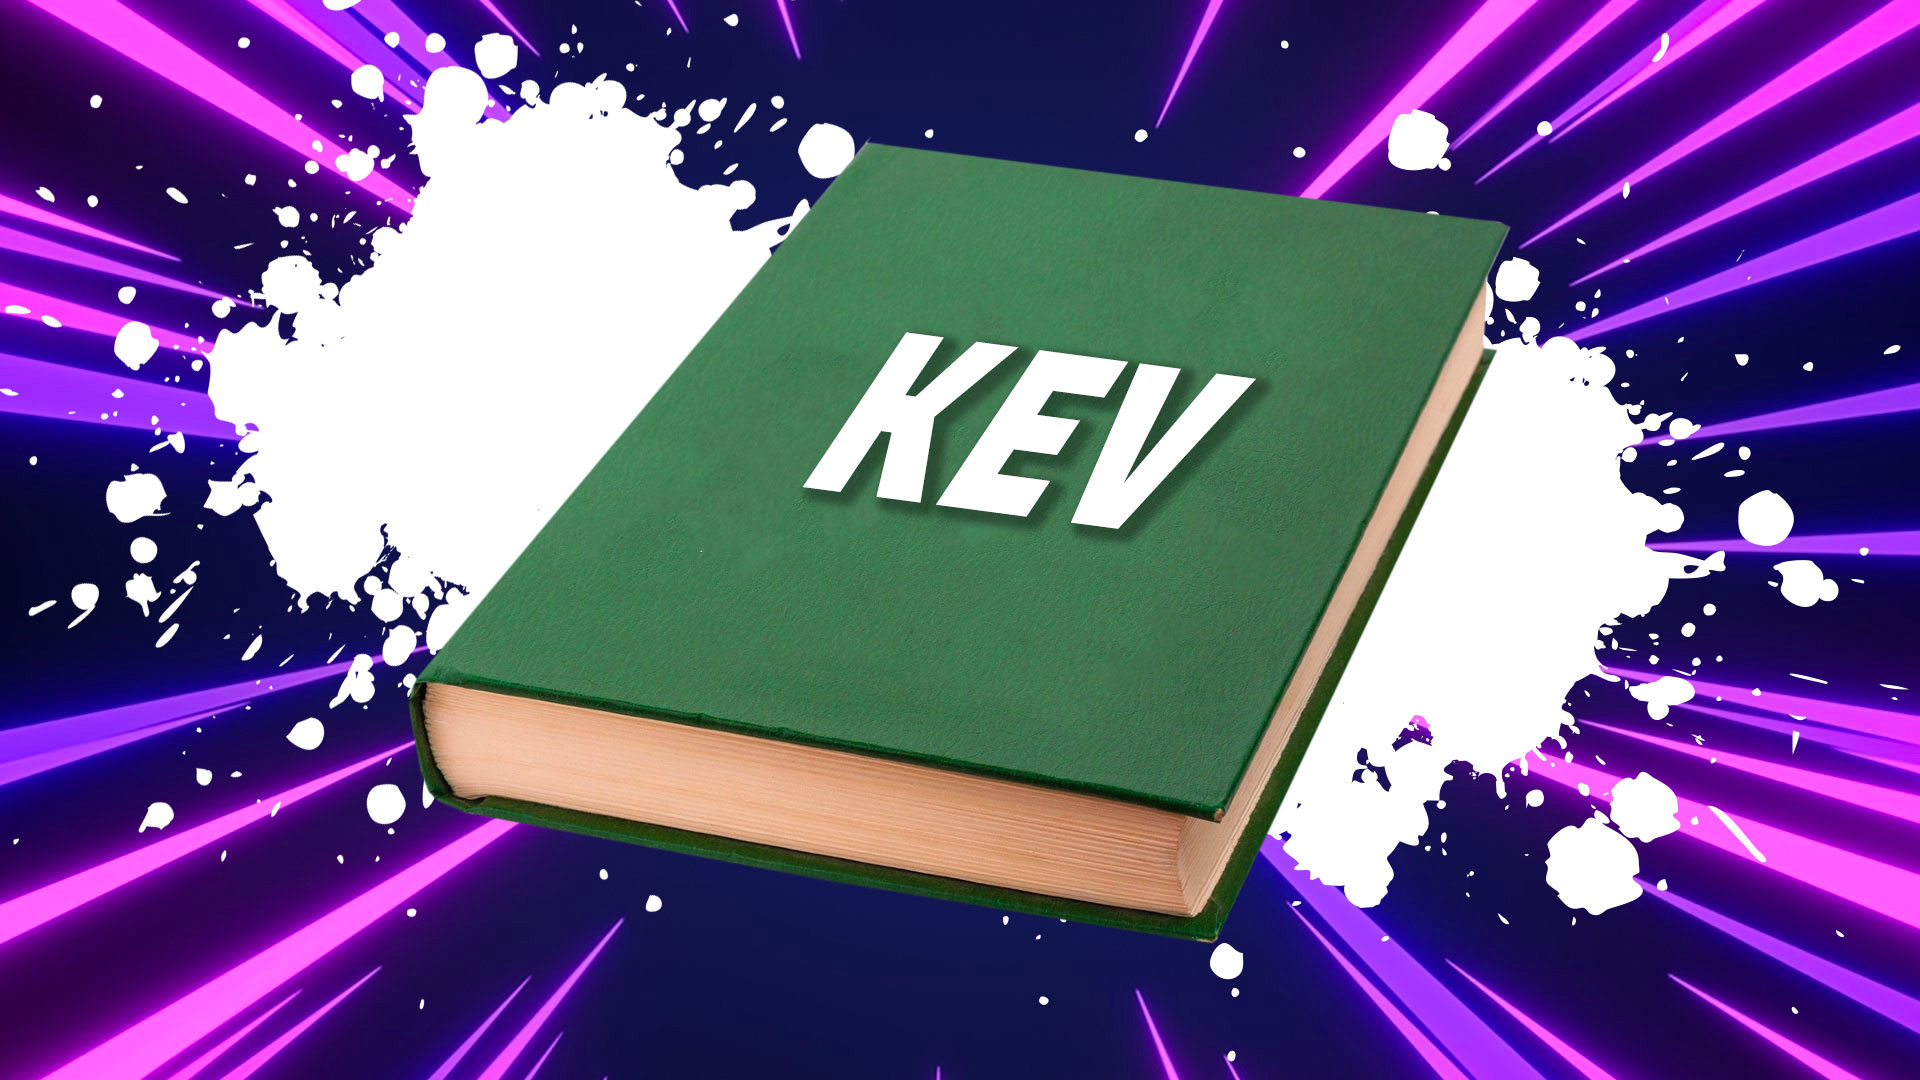 A book with Kev written on it